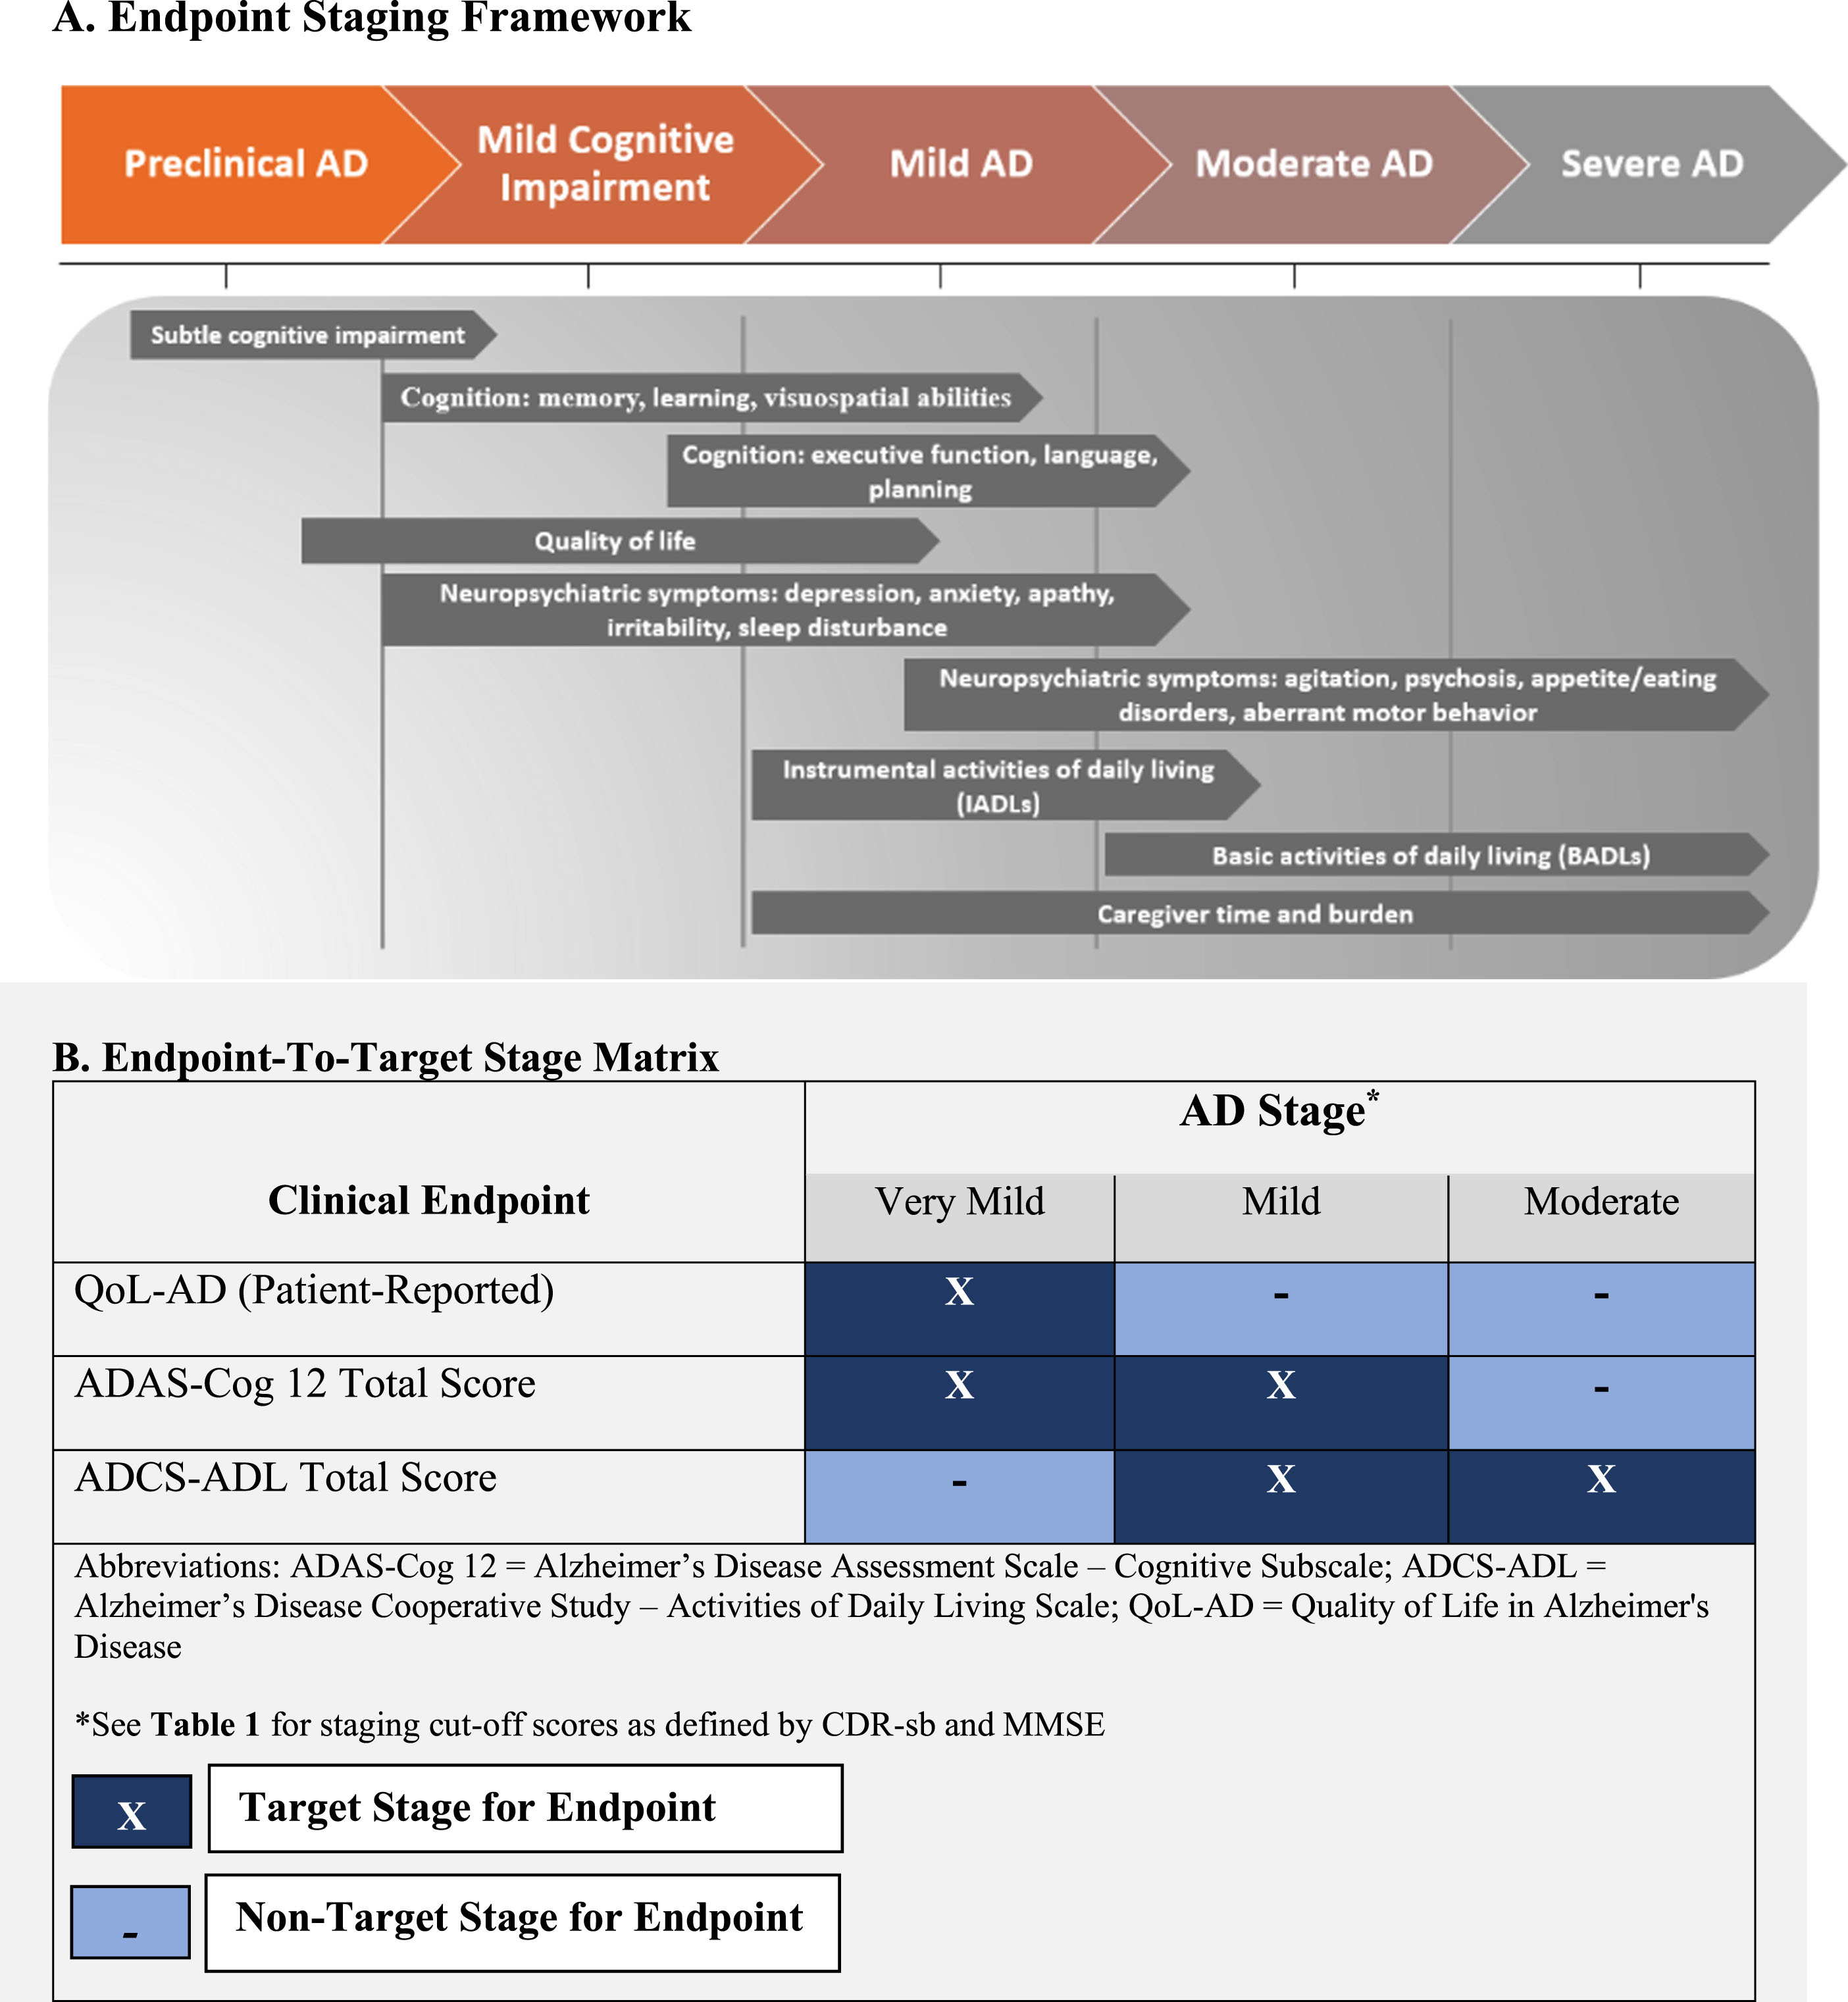 Endpoint Staging Framework and Endpoint-to-Target Stage Matrix.